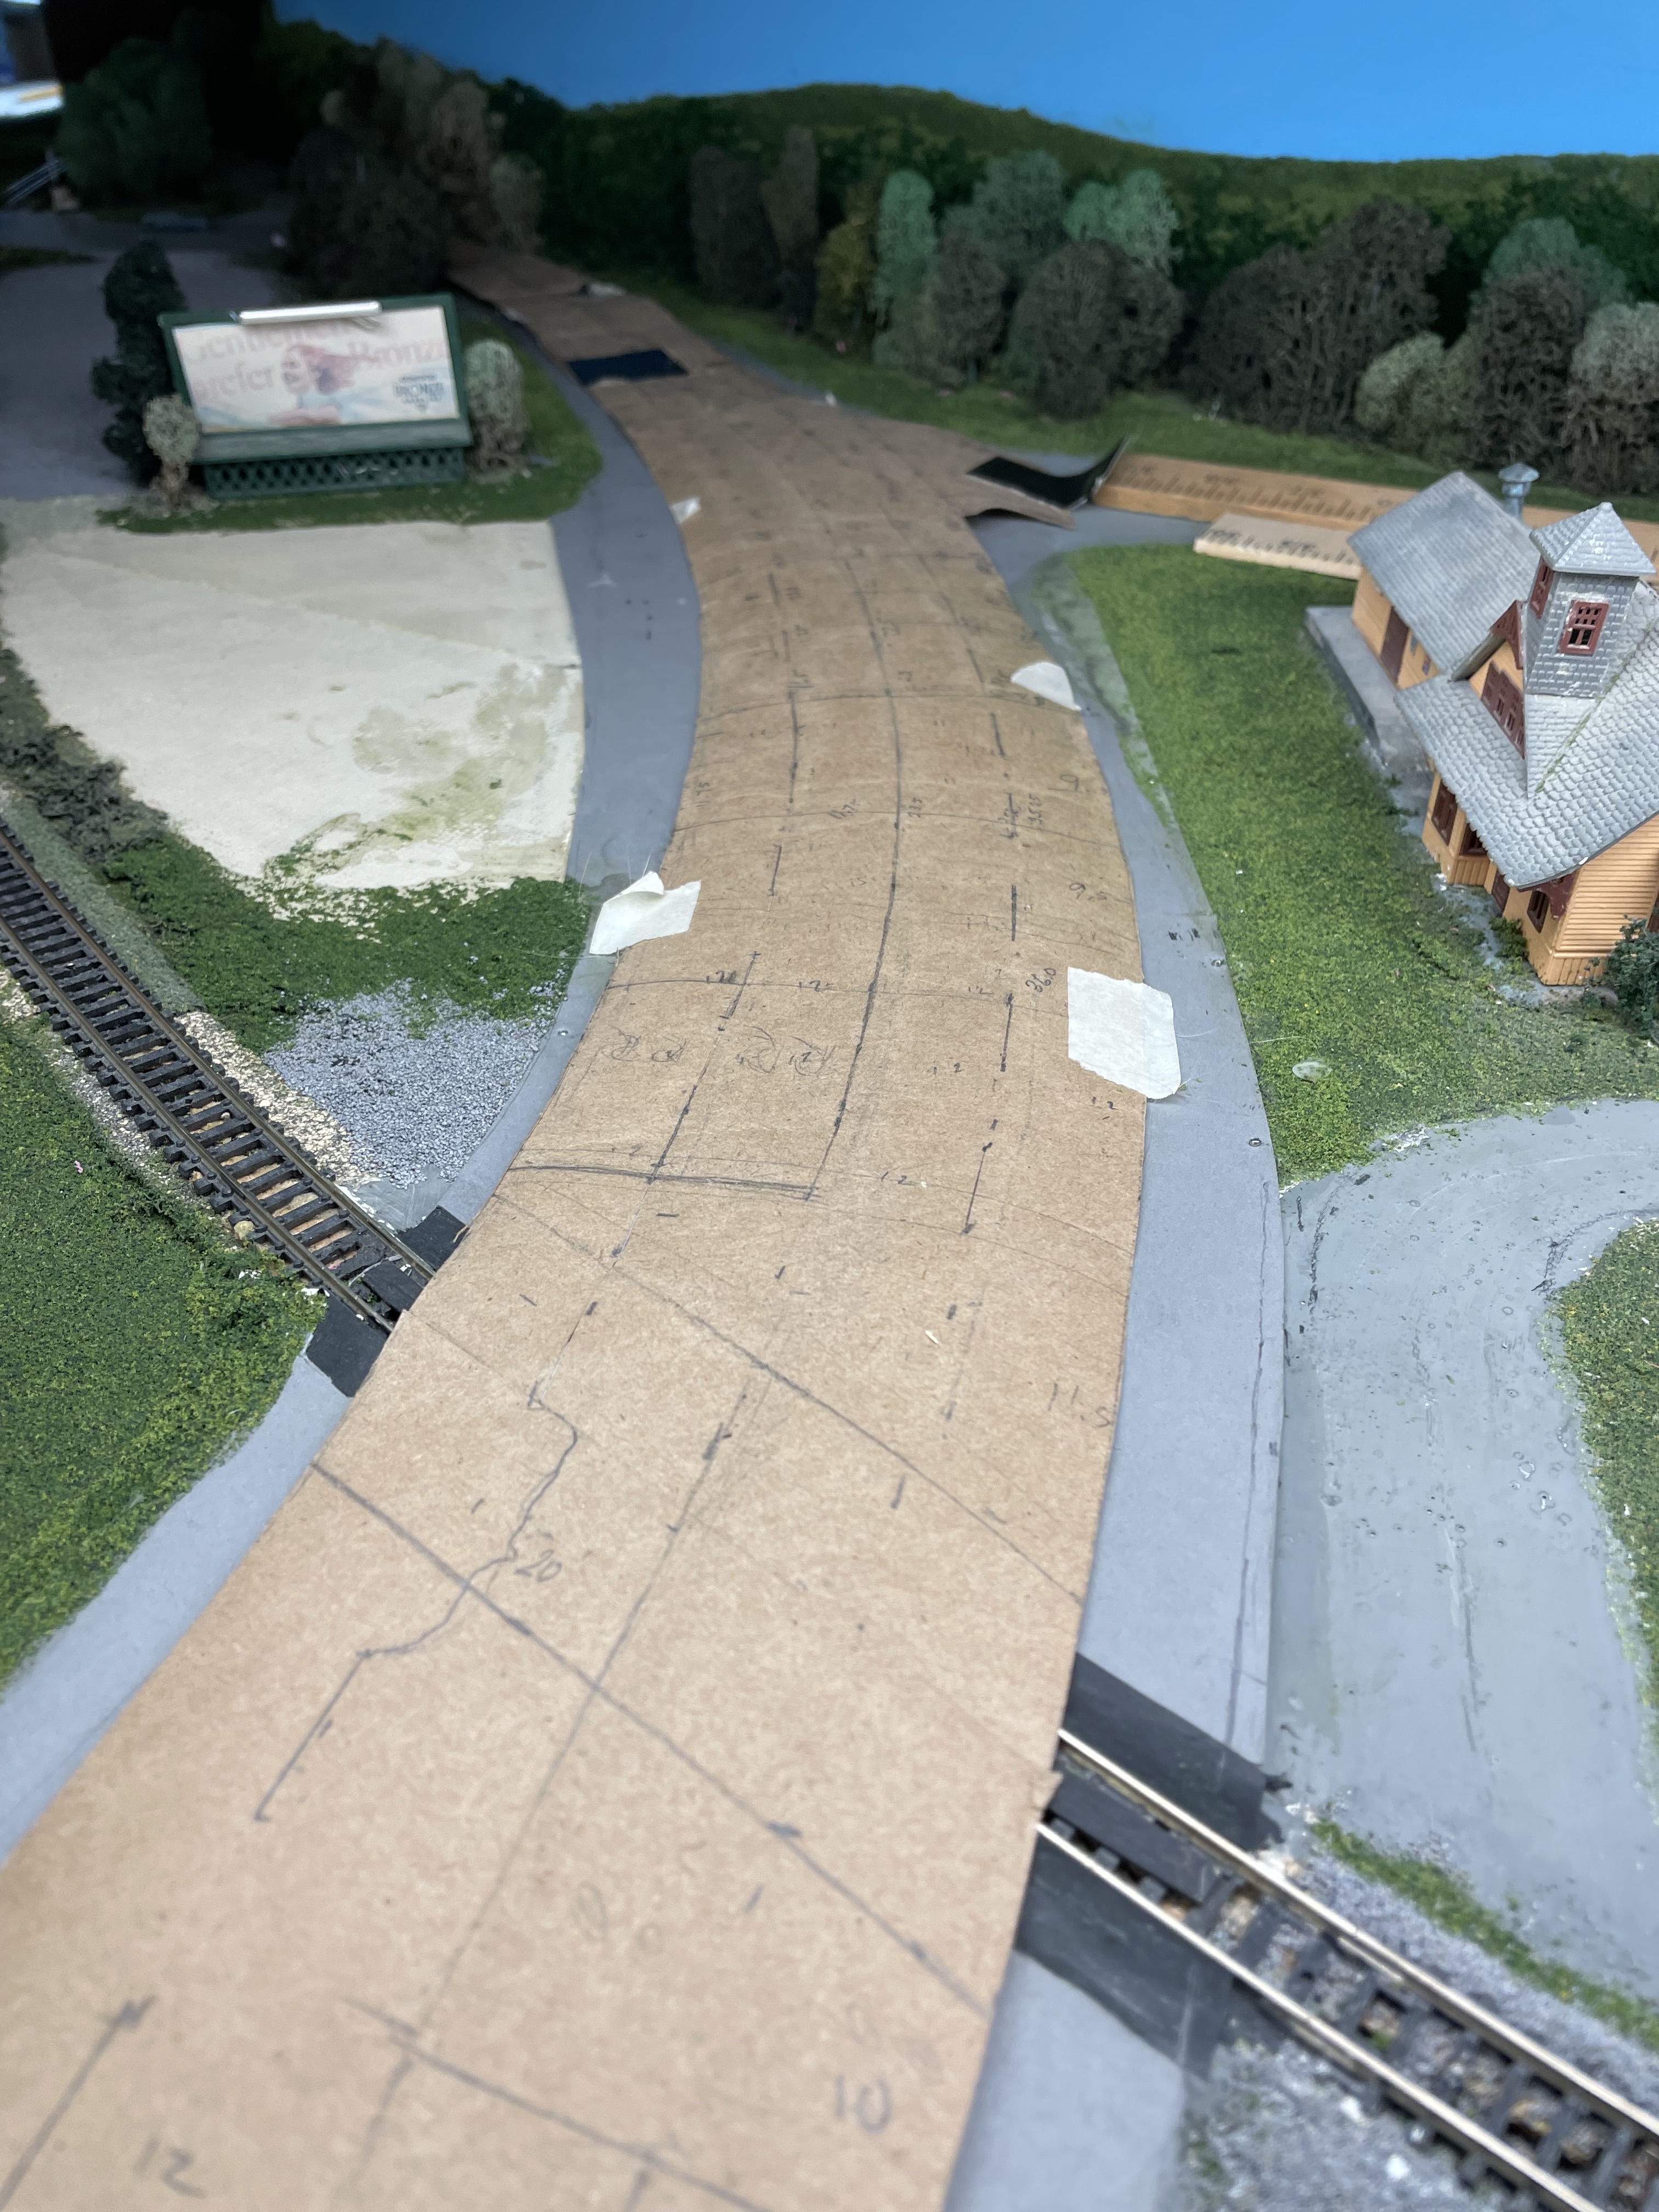 Kraft paper template of curved road lanes